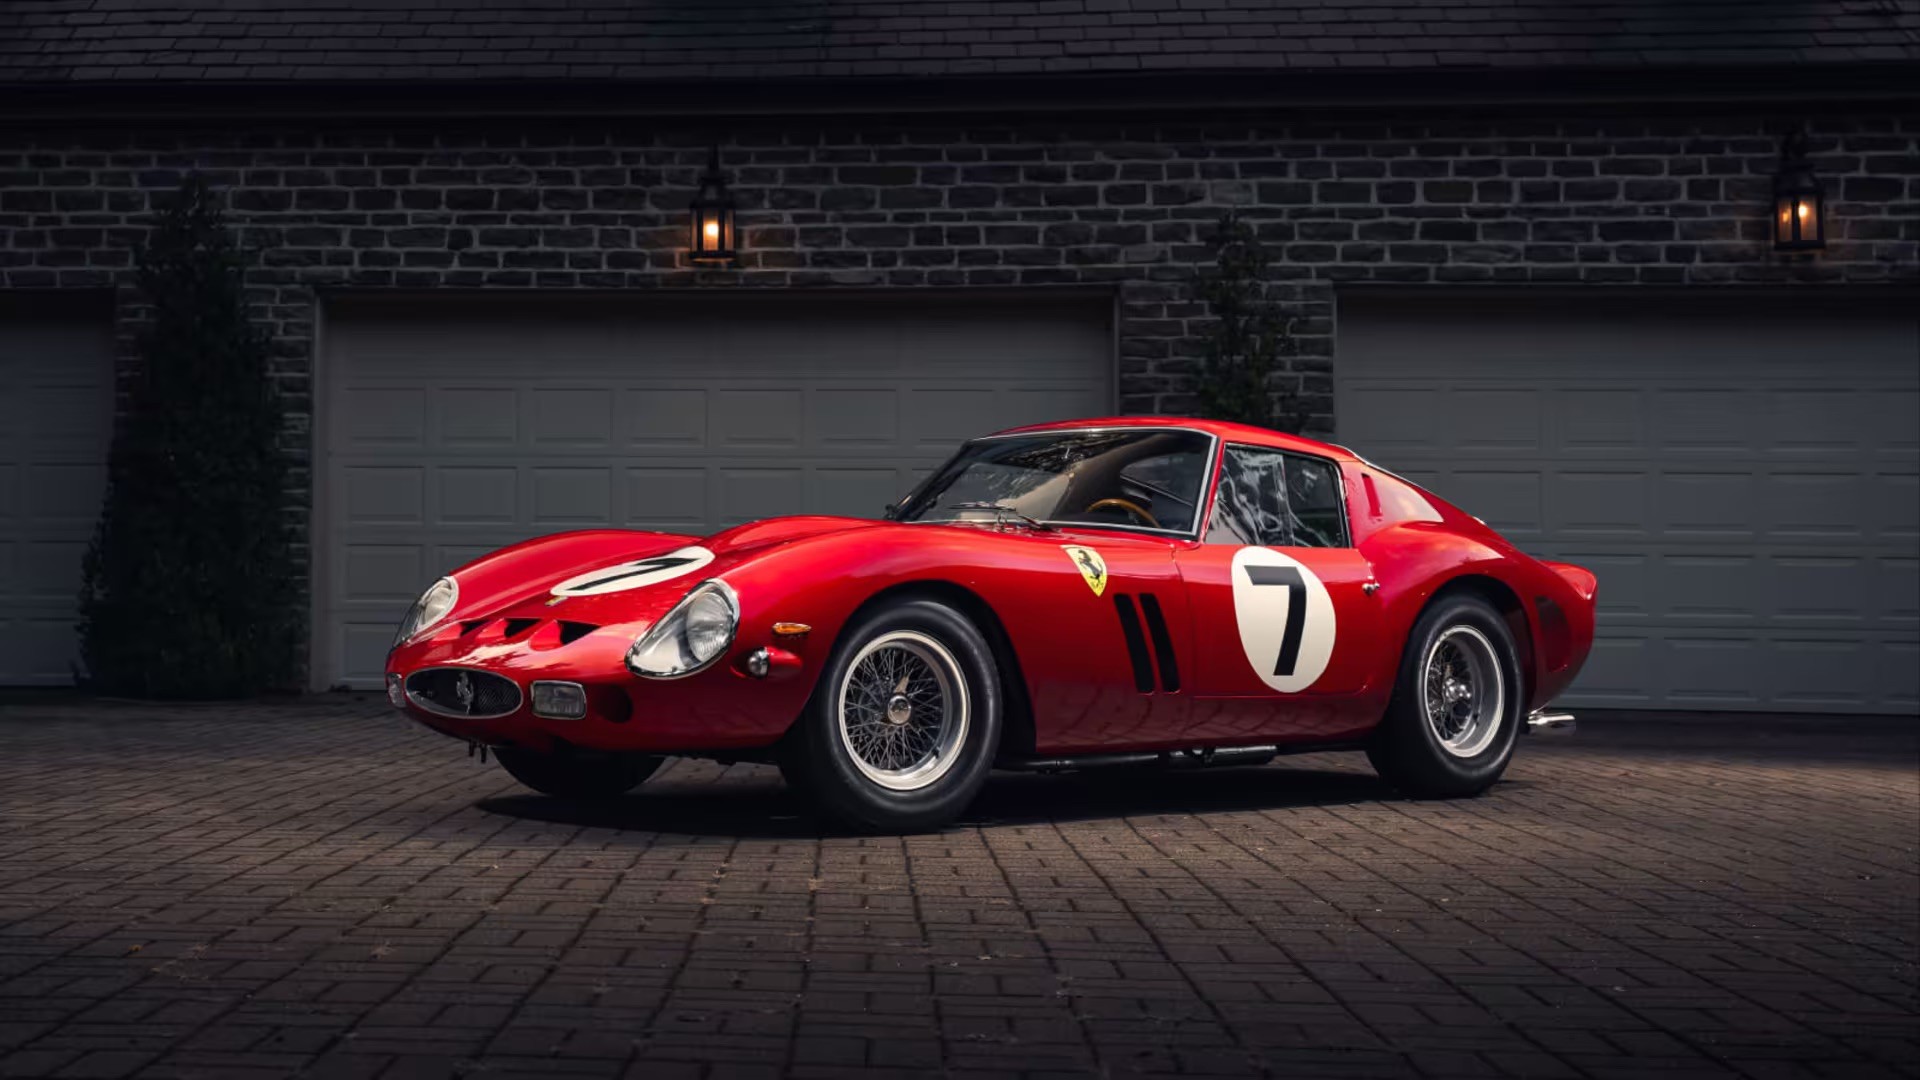 This 1962 Ferrari 330 LM 250 GTO is Now the Most Expensive Ferrari Sold at Auction